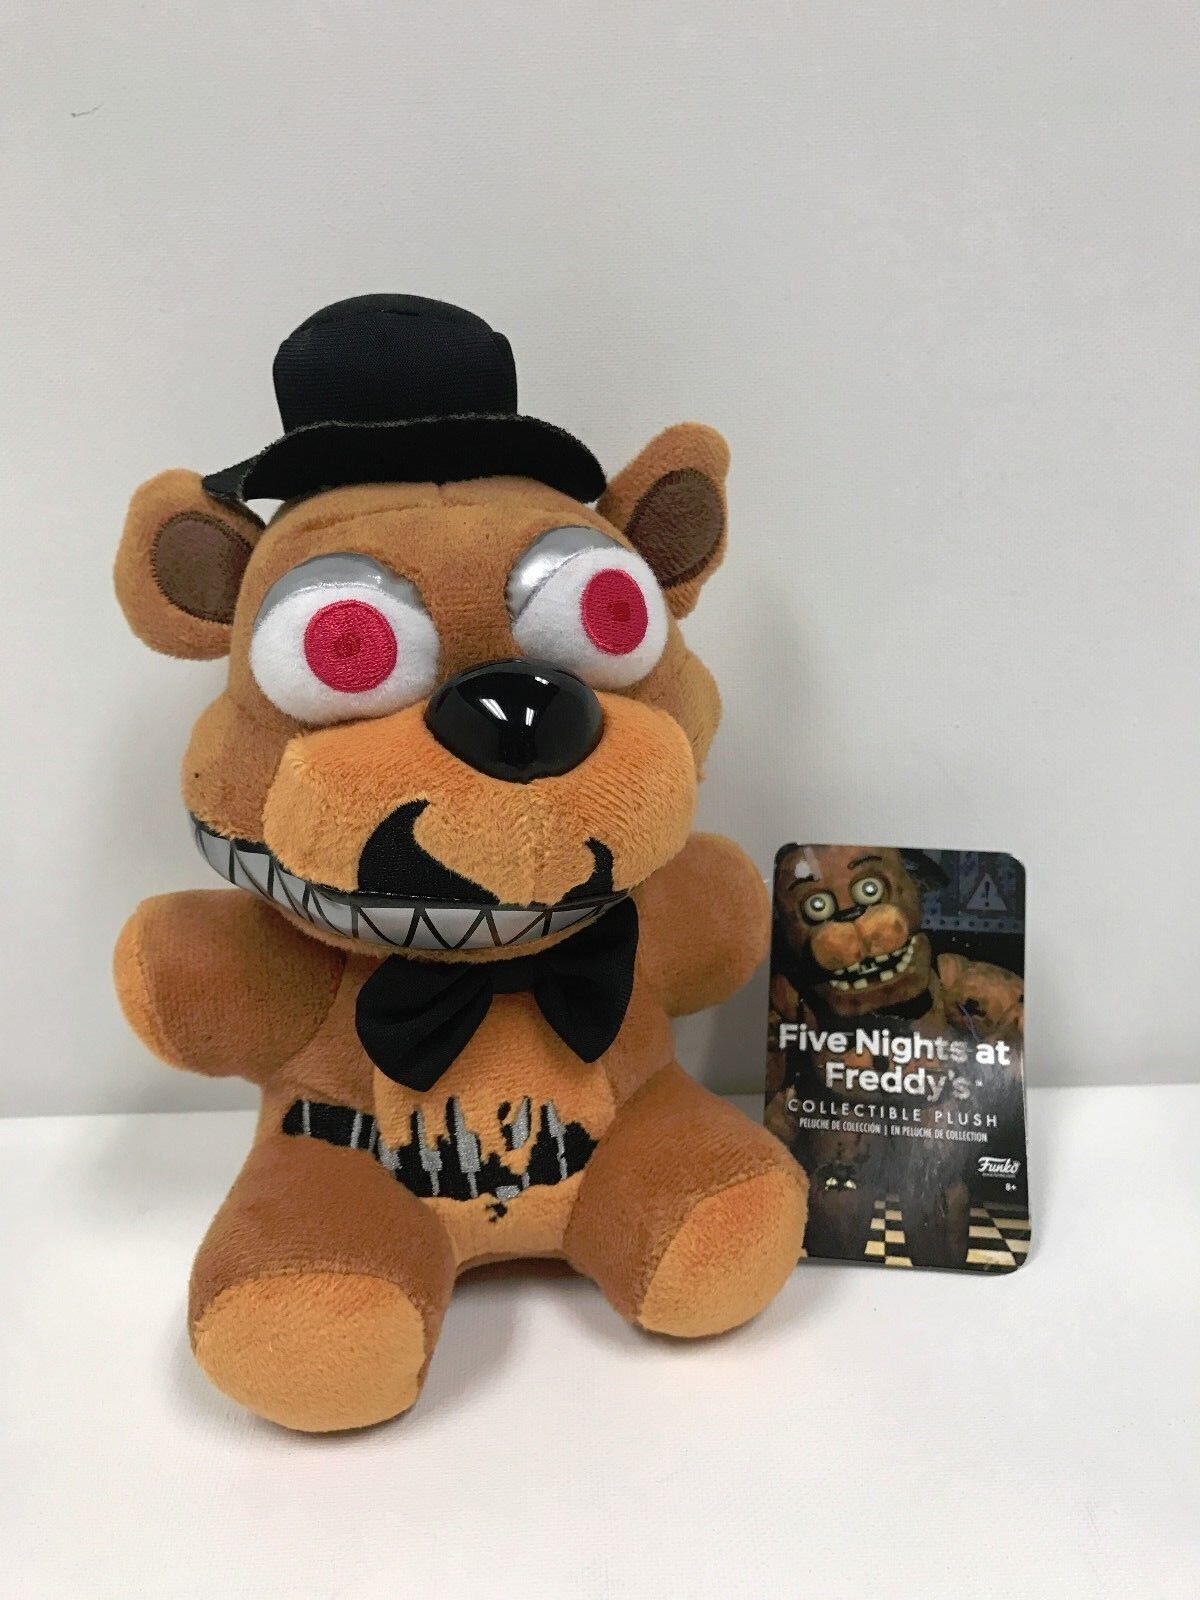 FUNKO FNAF NIGHTMARE FREDDY PLUSH FIRST SERIES 2016 TAG (VAULTED)